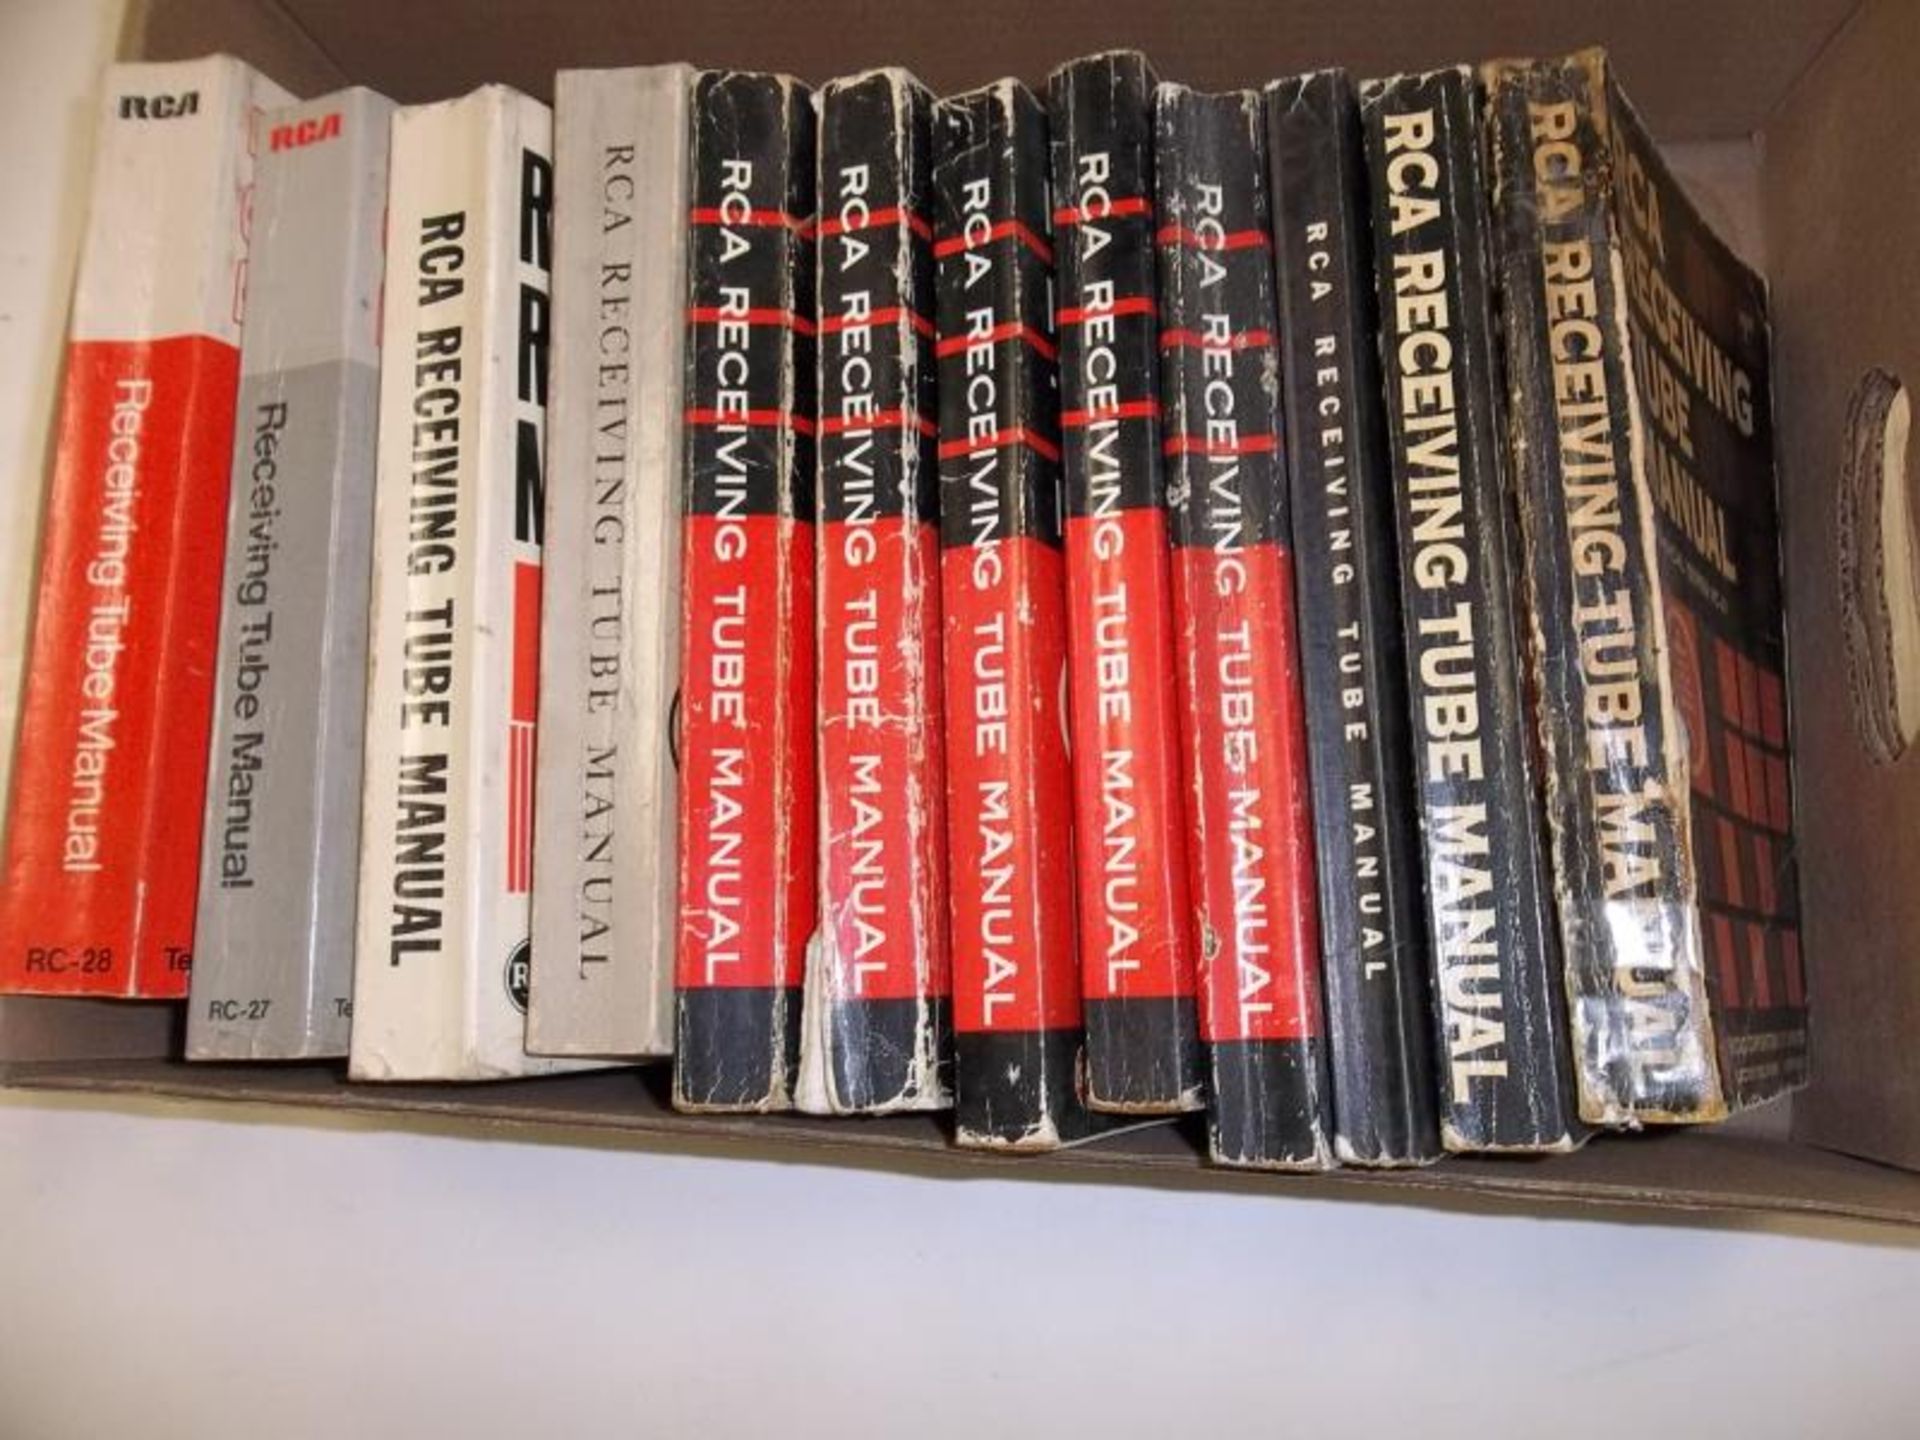 Lot of 22 Paperbacks, mostly 20 RCA Receiving Tube Manuals and 2 High Fidelty Books, 150s, 60s and - Image 2 of 4